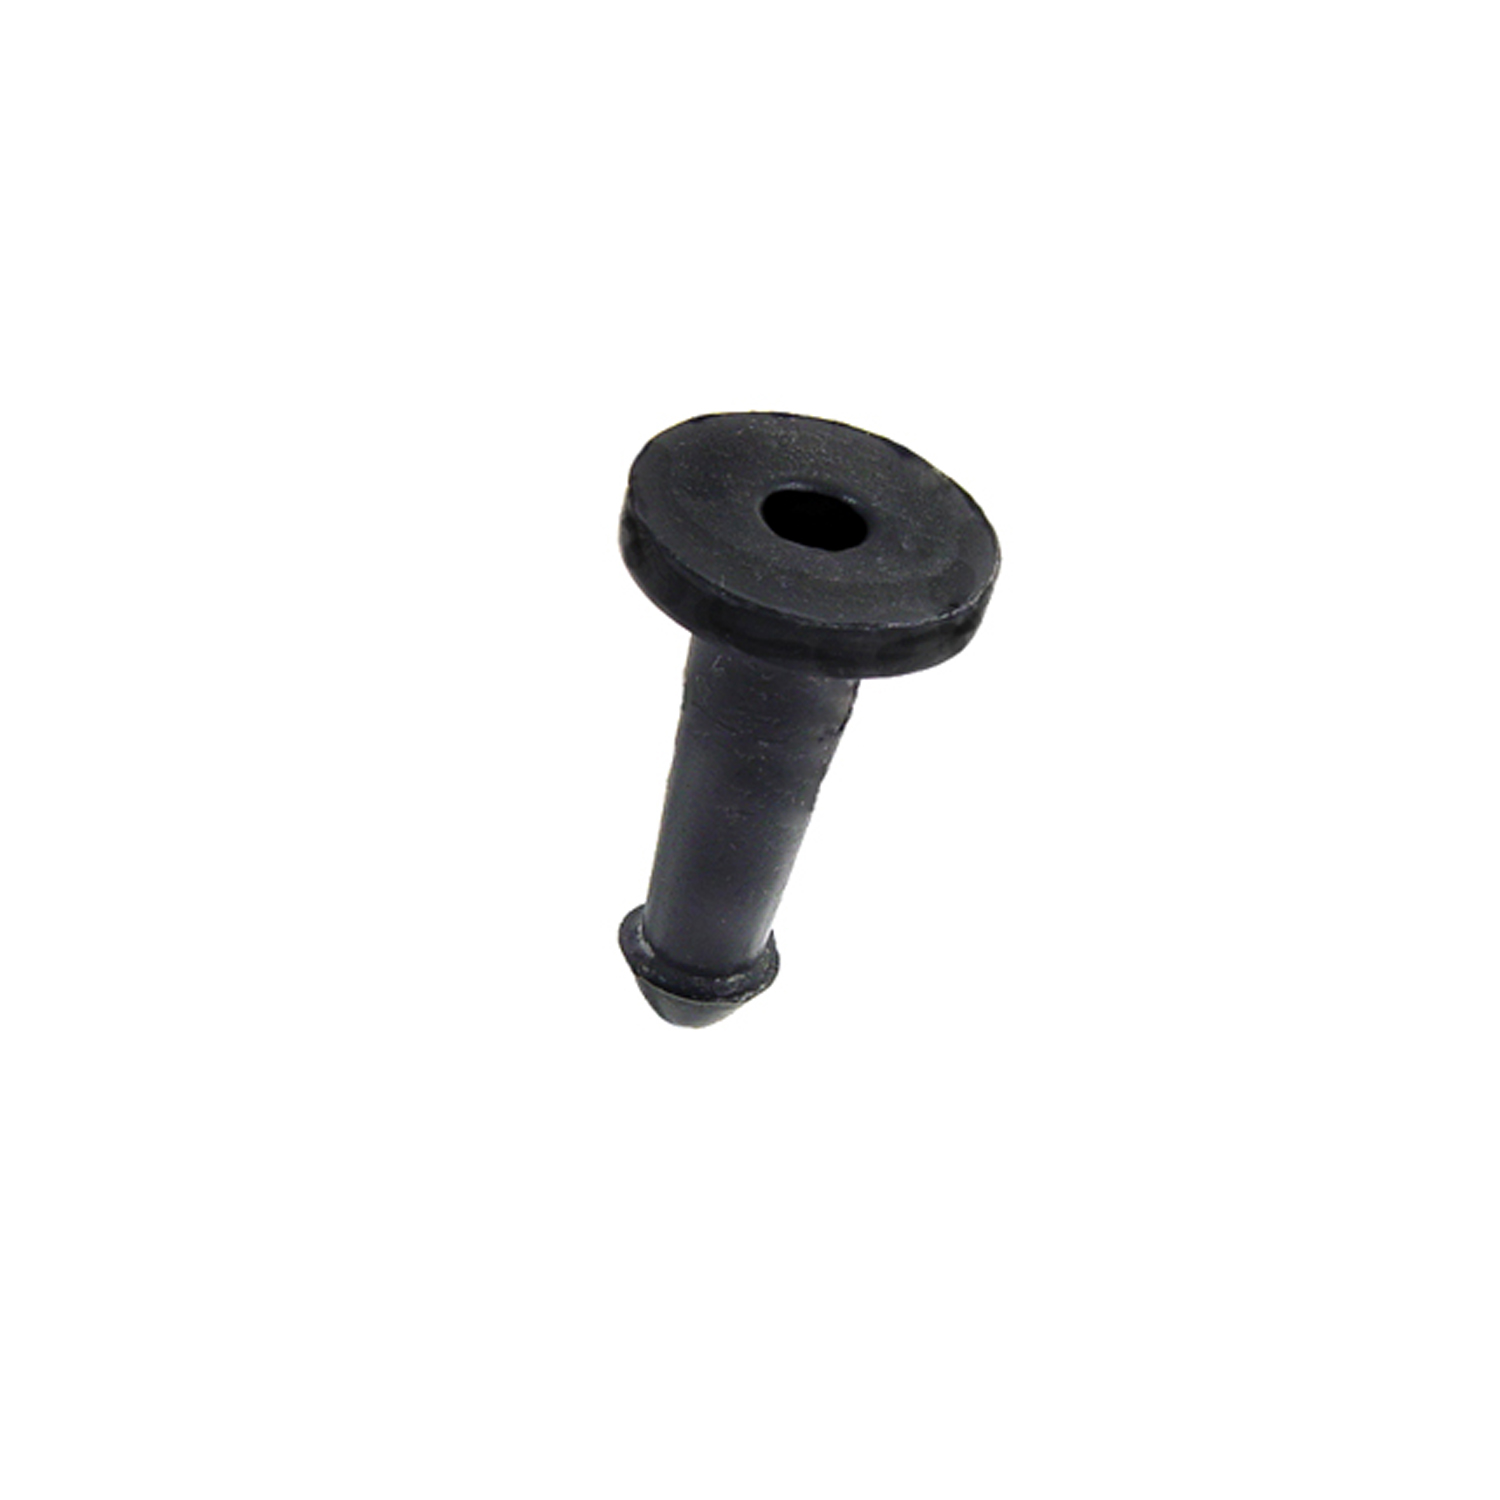 1974 Plymouth Valiant Firewall to Dash Insulation Fastener.  Made of black rubber-SM 80-B